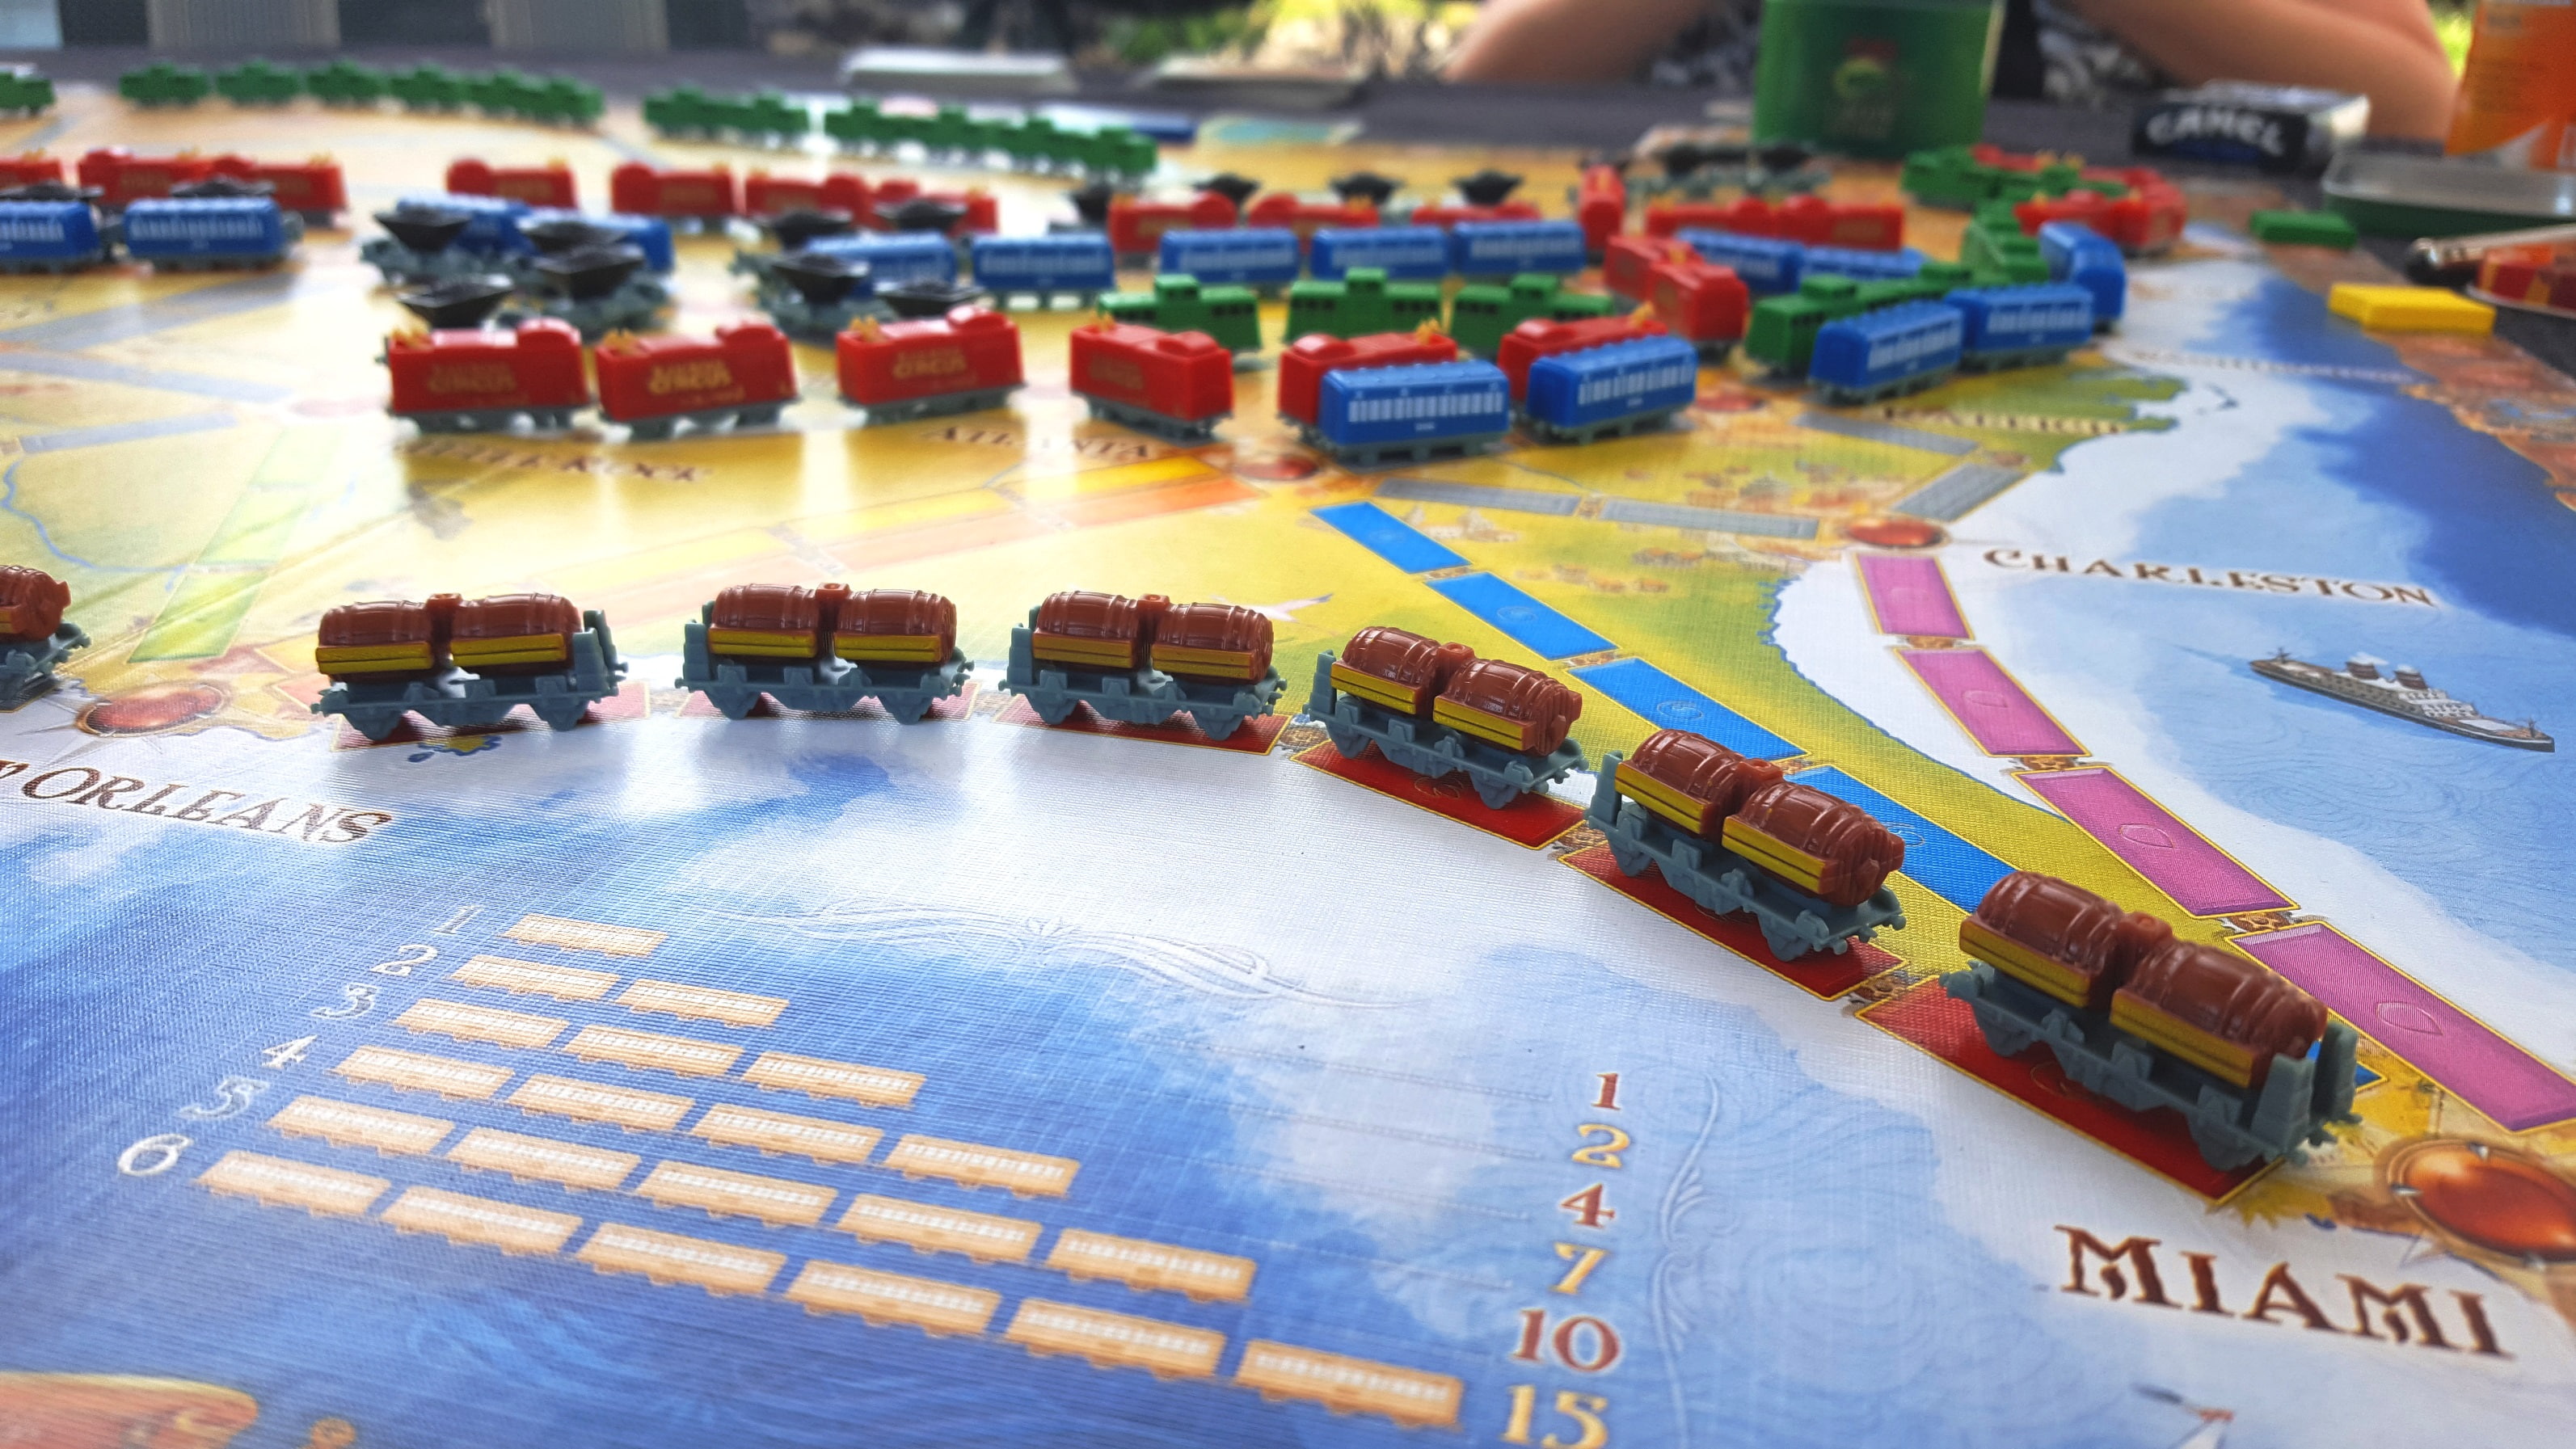 ticket to ride, board games, text, high angle view, creativity